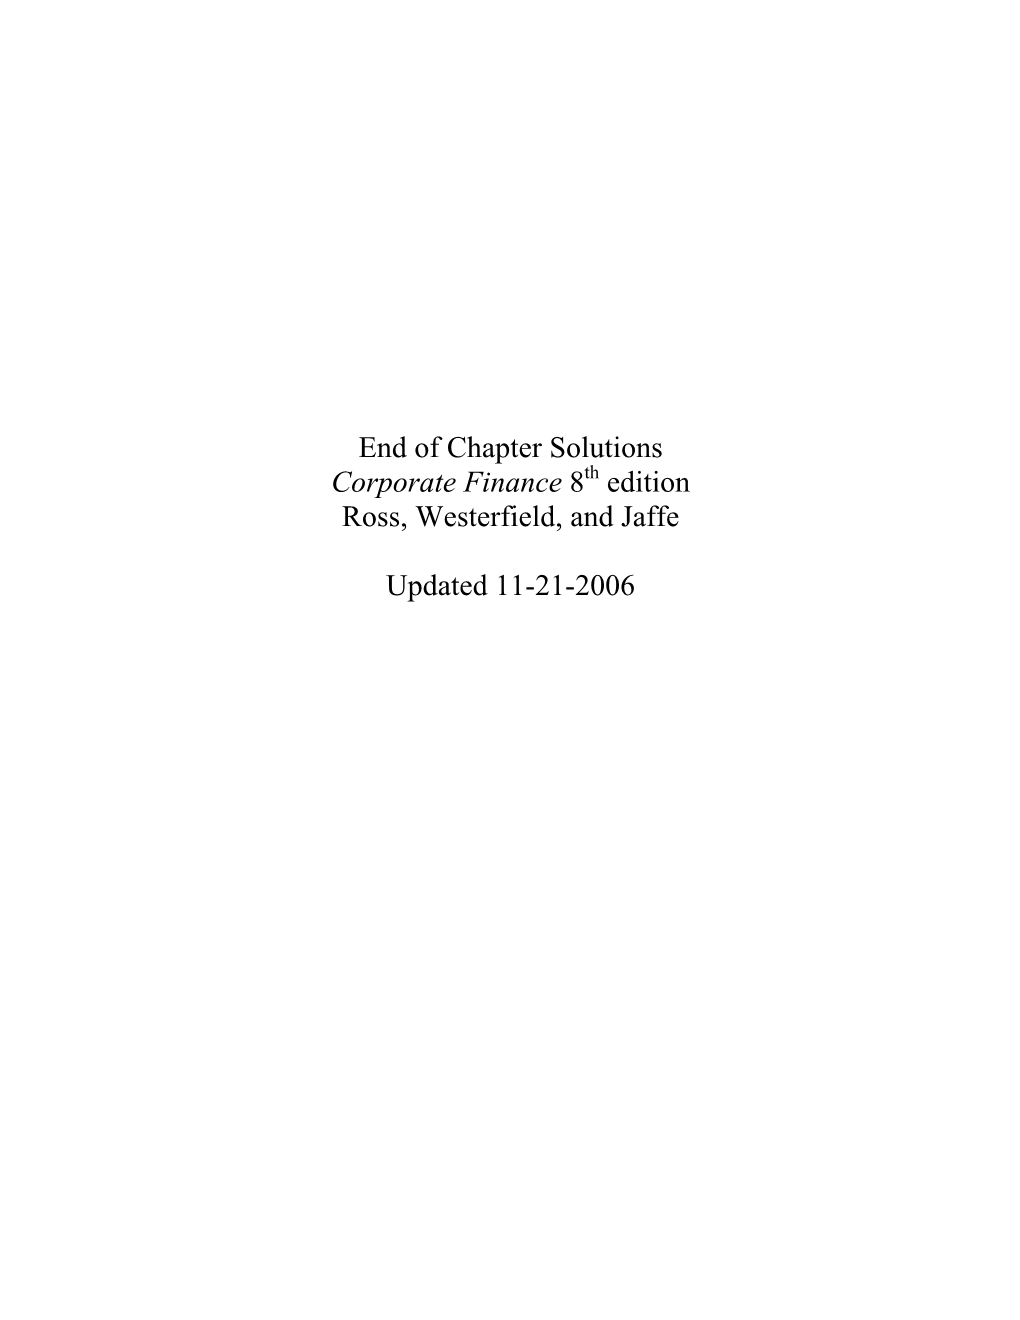 End of Chapter Solutions Corporate Finance 8Th Edition Ross, Westerfield, and Jaffe